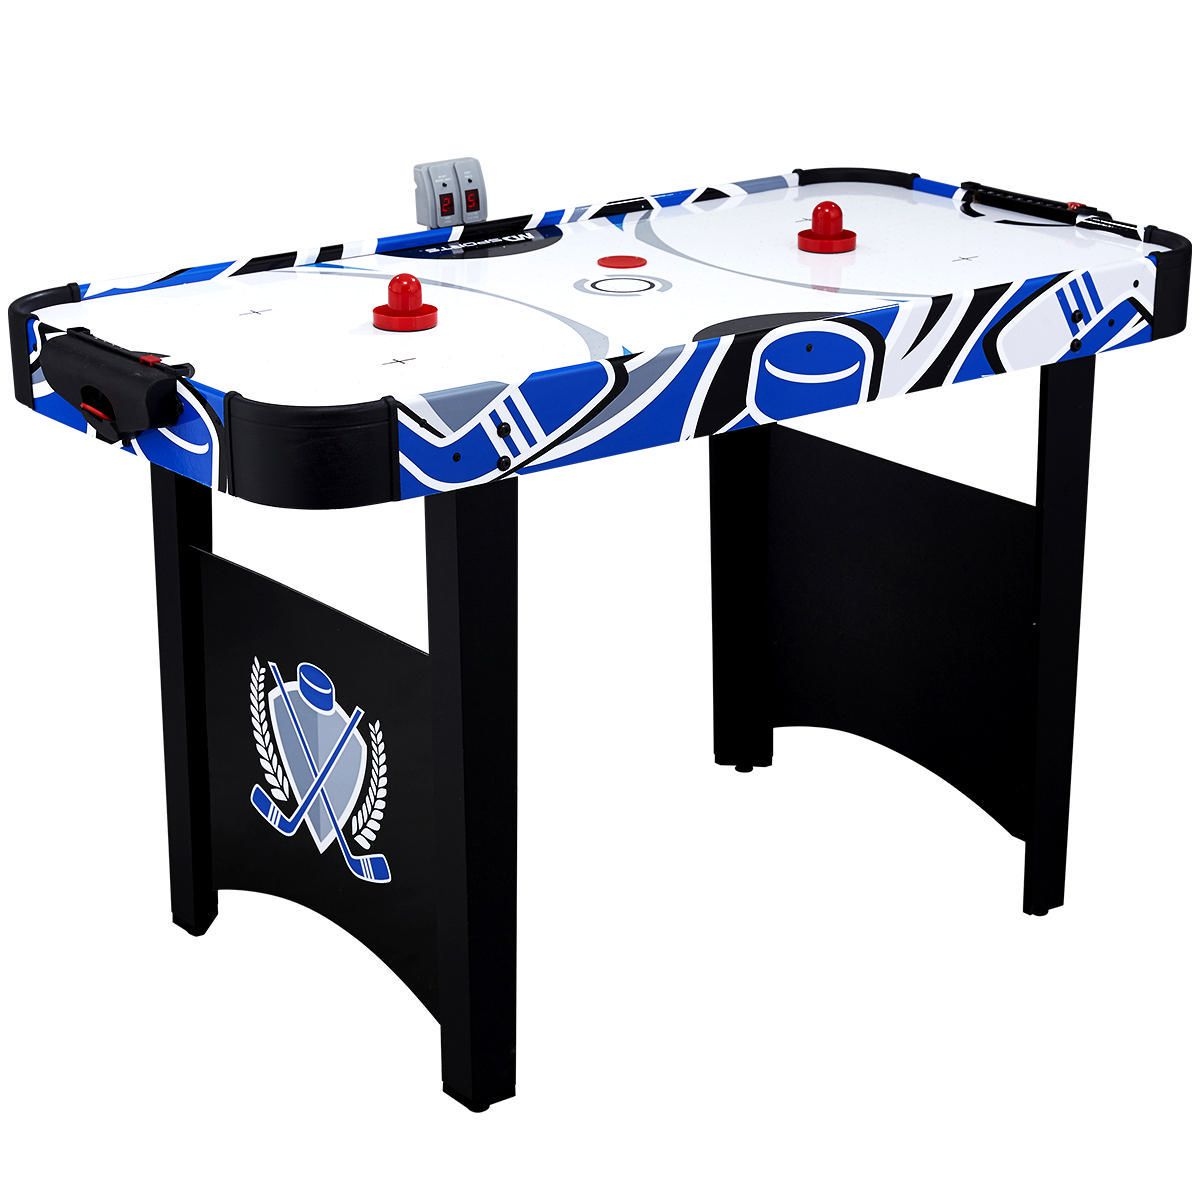 MD Sports 48 inches Air Hockey Table